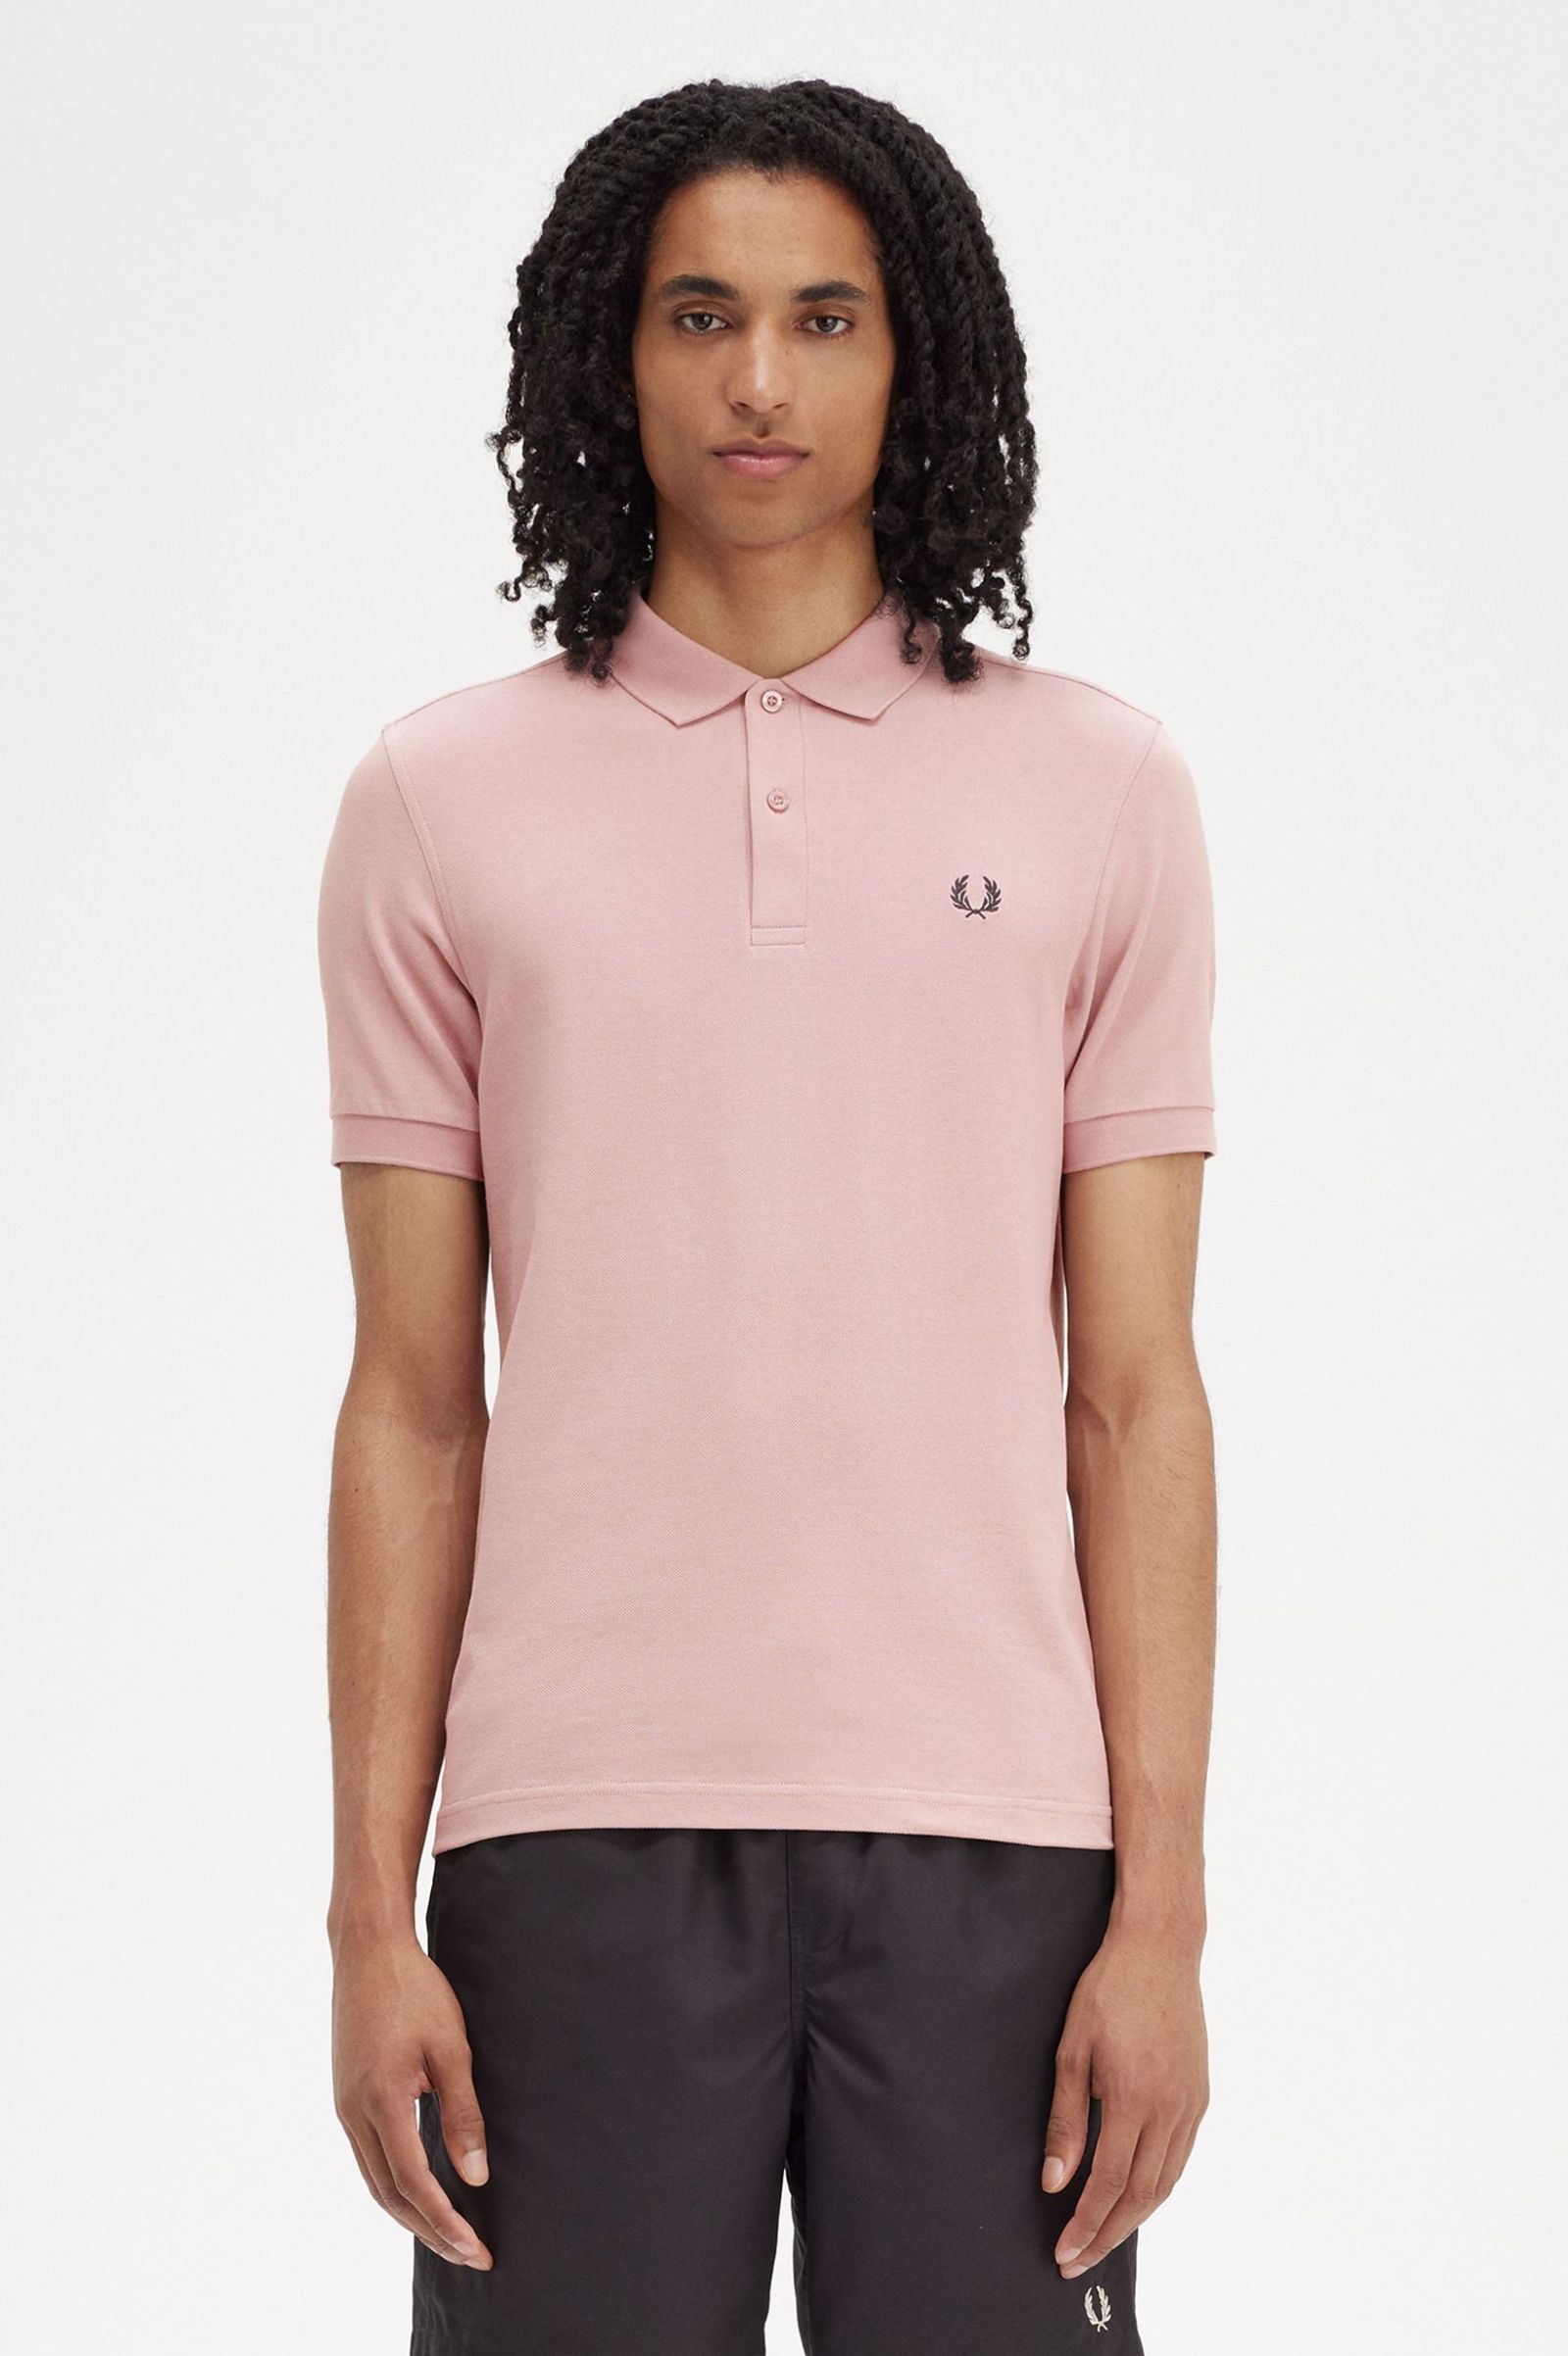 Fred Perry Plain Shirt M6000 in Dusty Rose Pink / Black